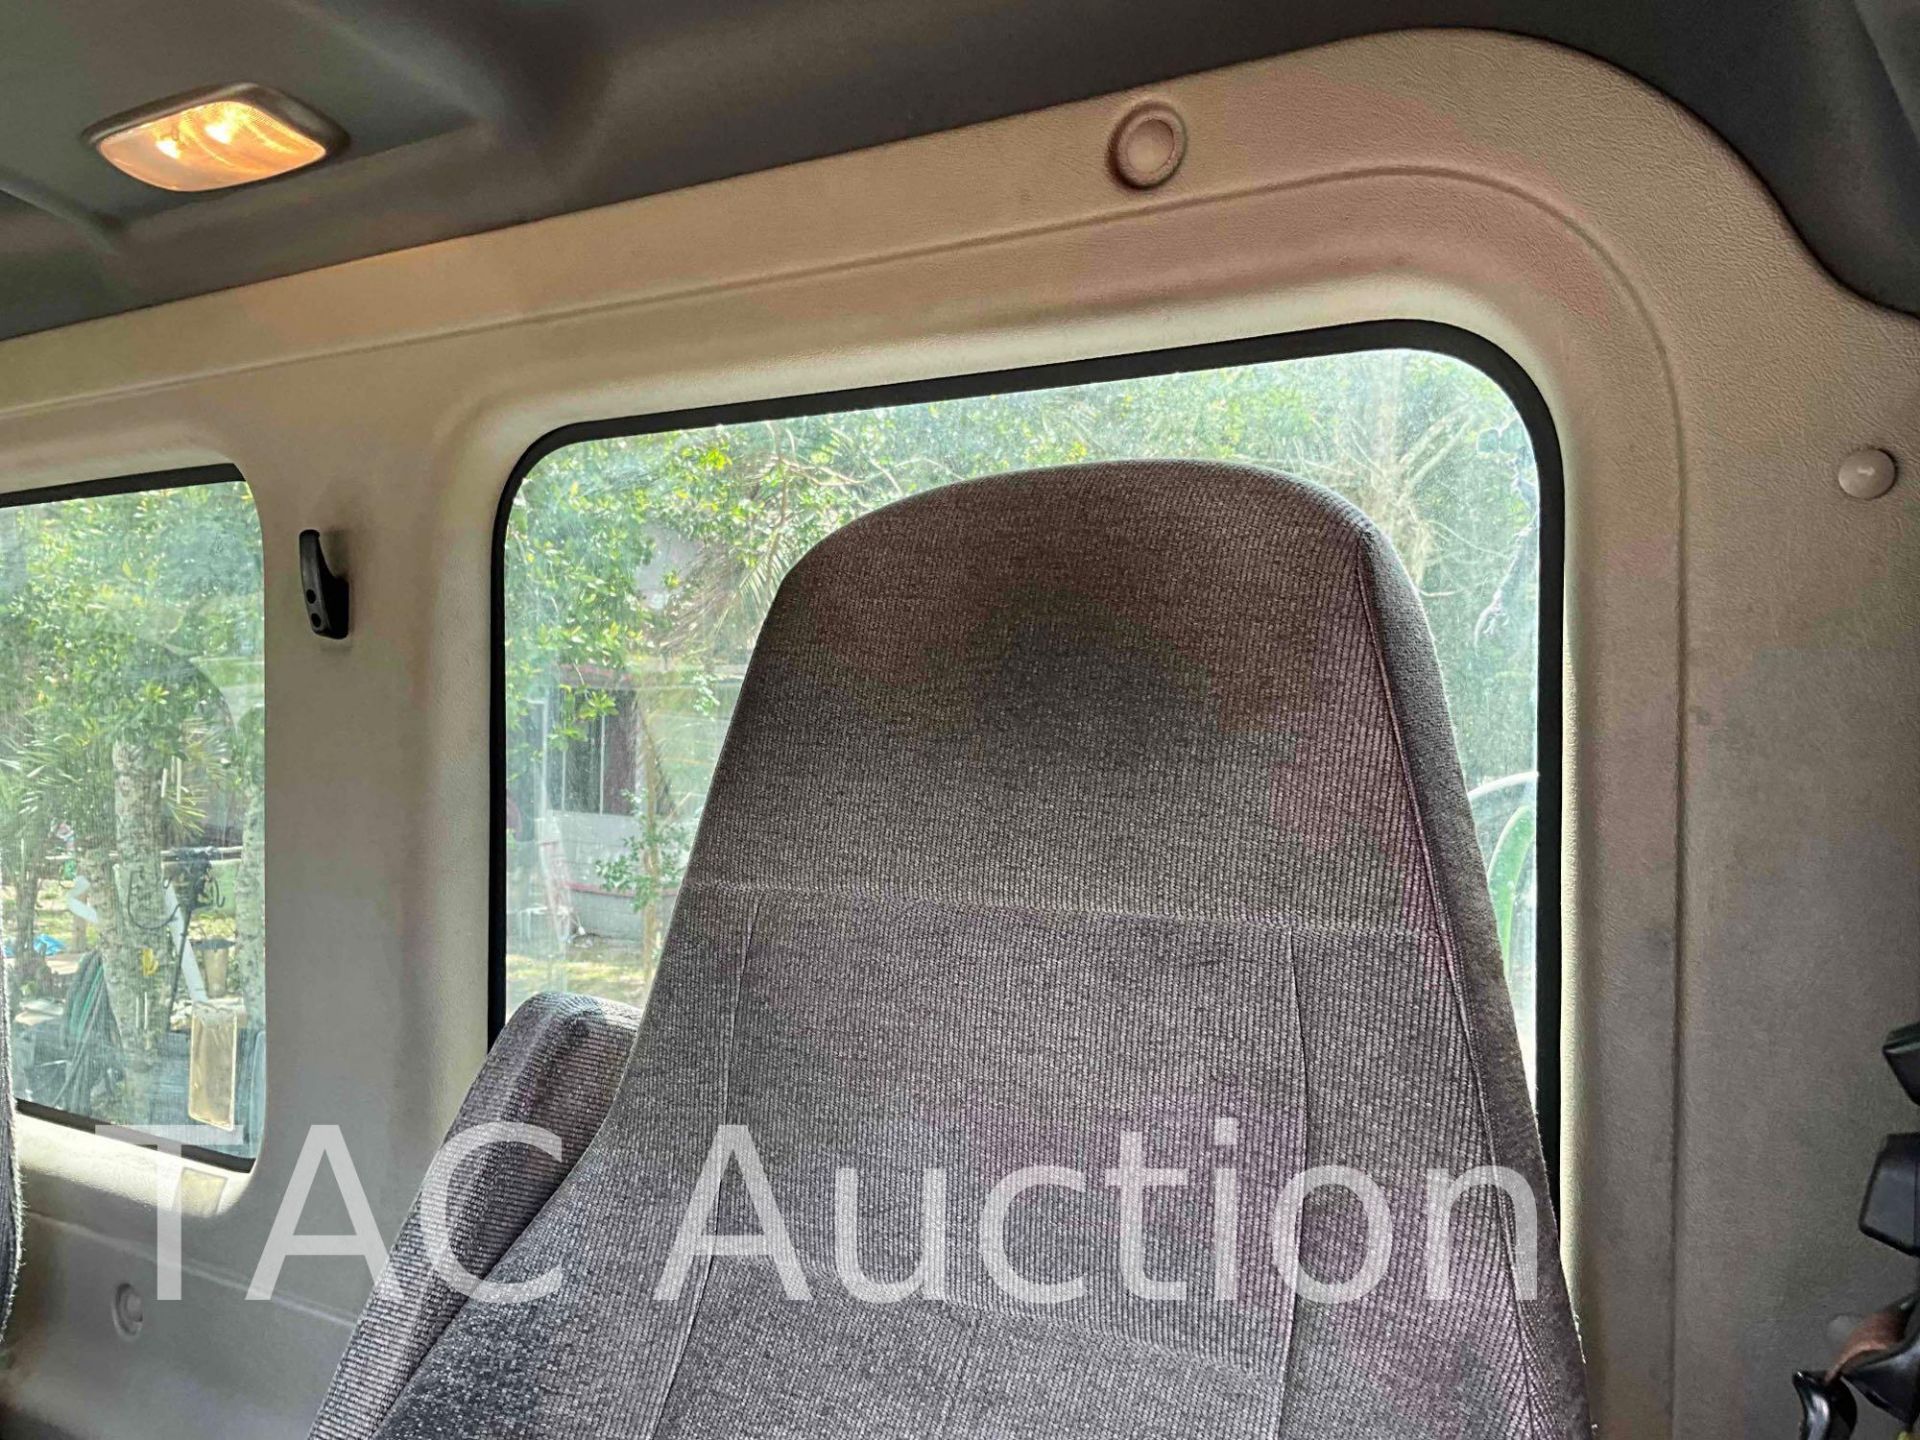 2016 Freightliner Cascadia Day Cab - Image 19 of 78